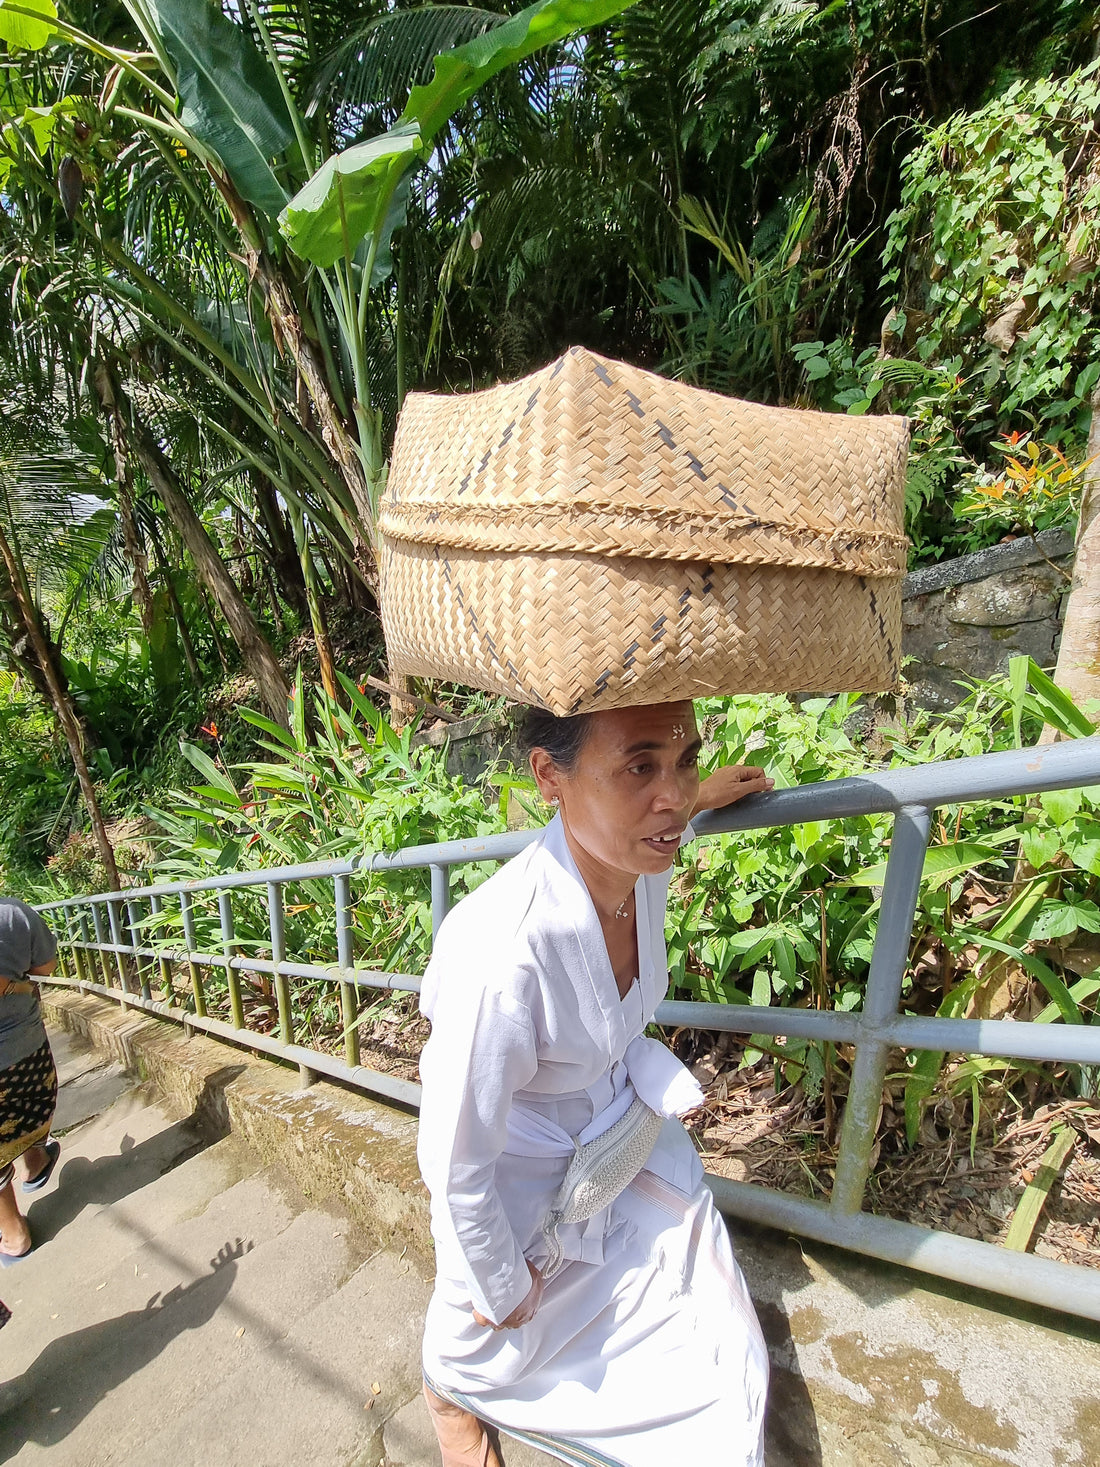 Bali Handcrafts: Sustainable and Ethical Products for Conscious Consumers